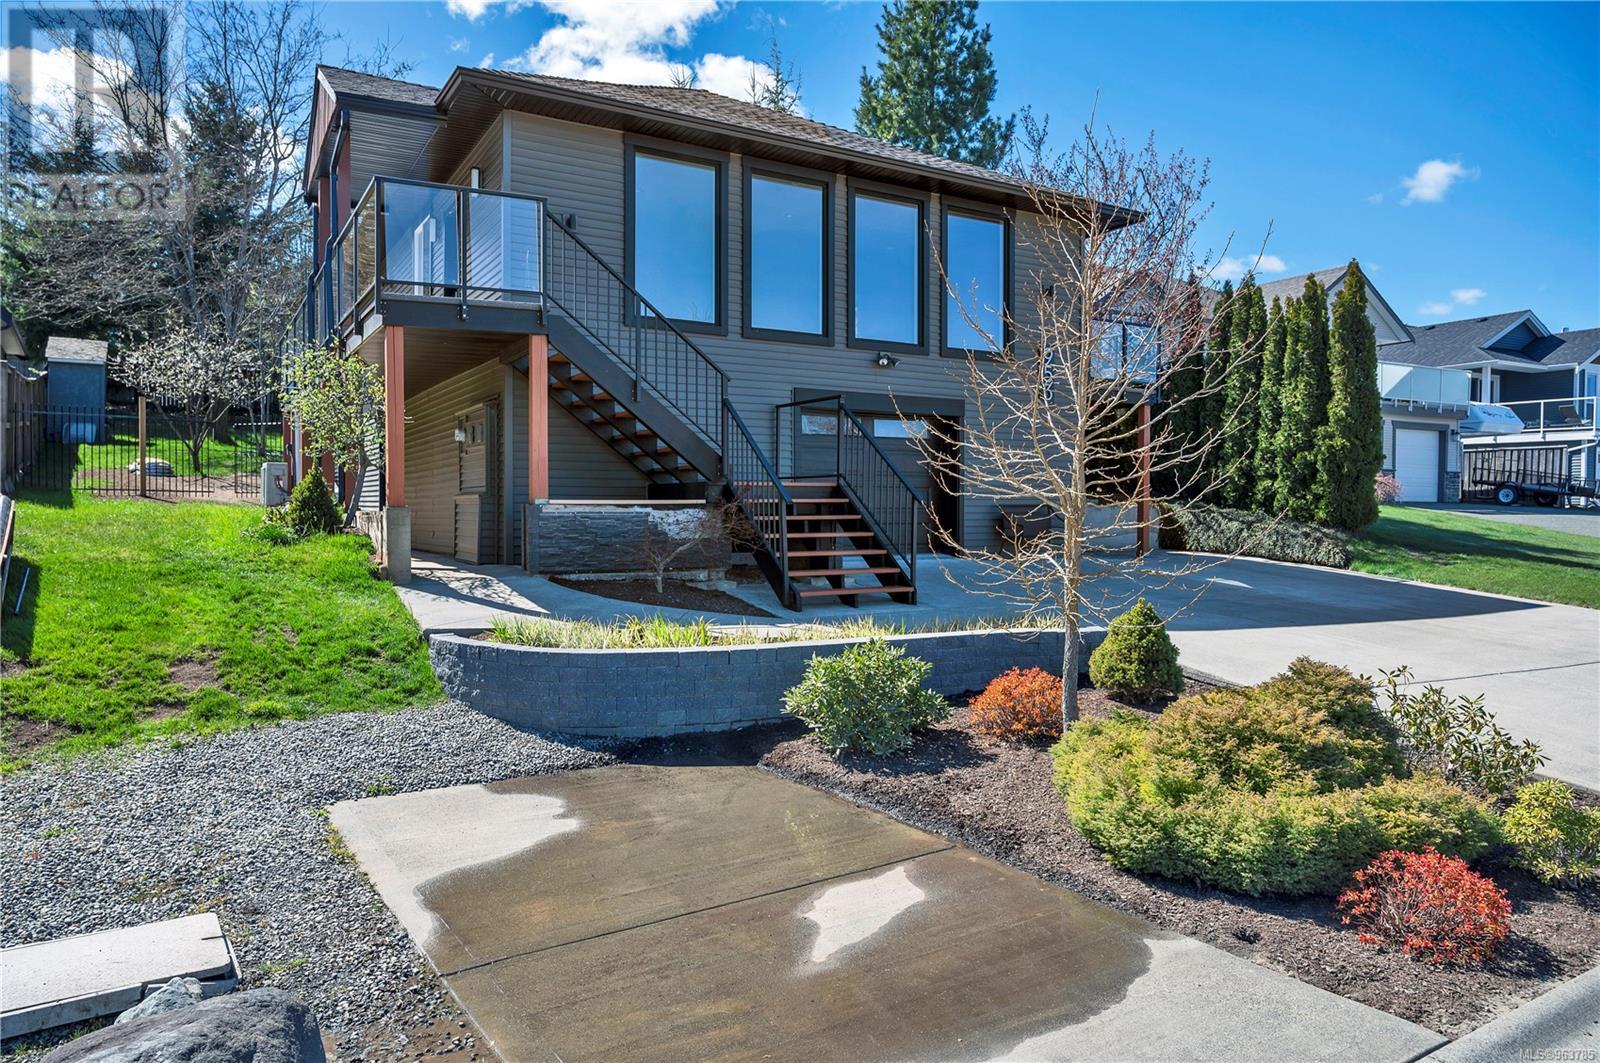 953 Holm Rd, campbell river, British Columbia